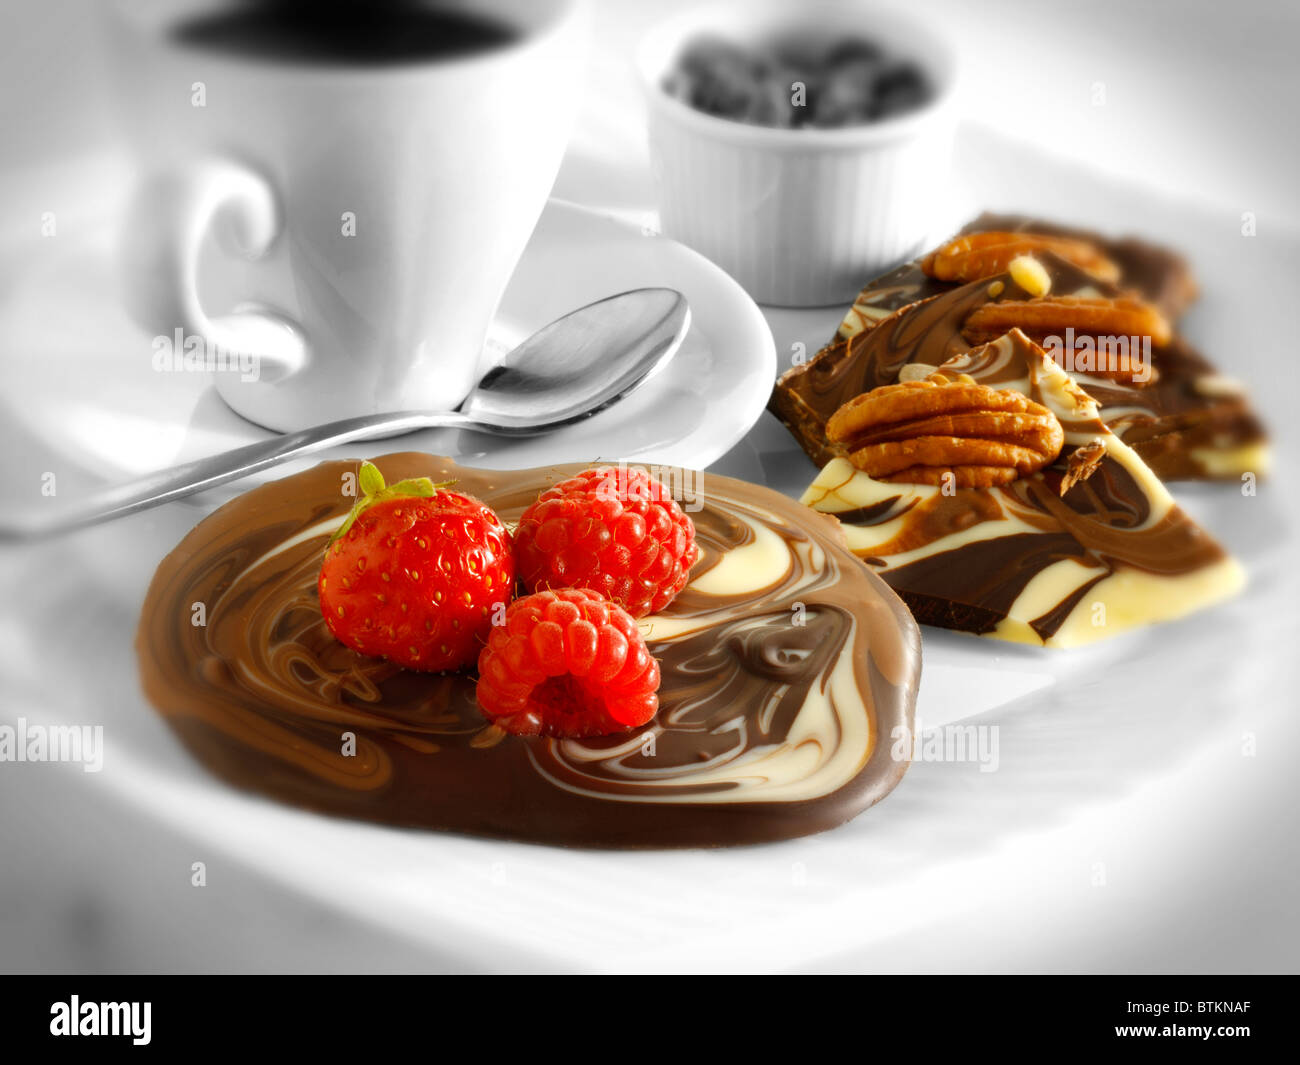 Chocolate biscuits and coffee Stock Photo